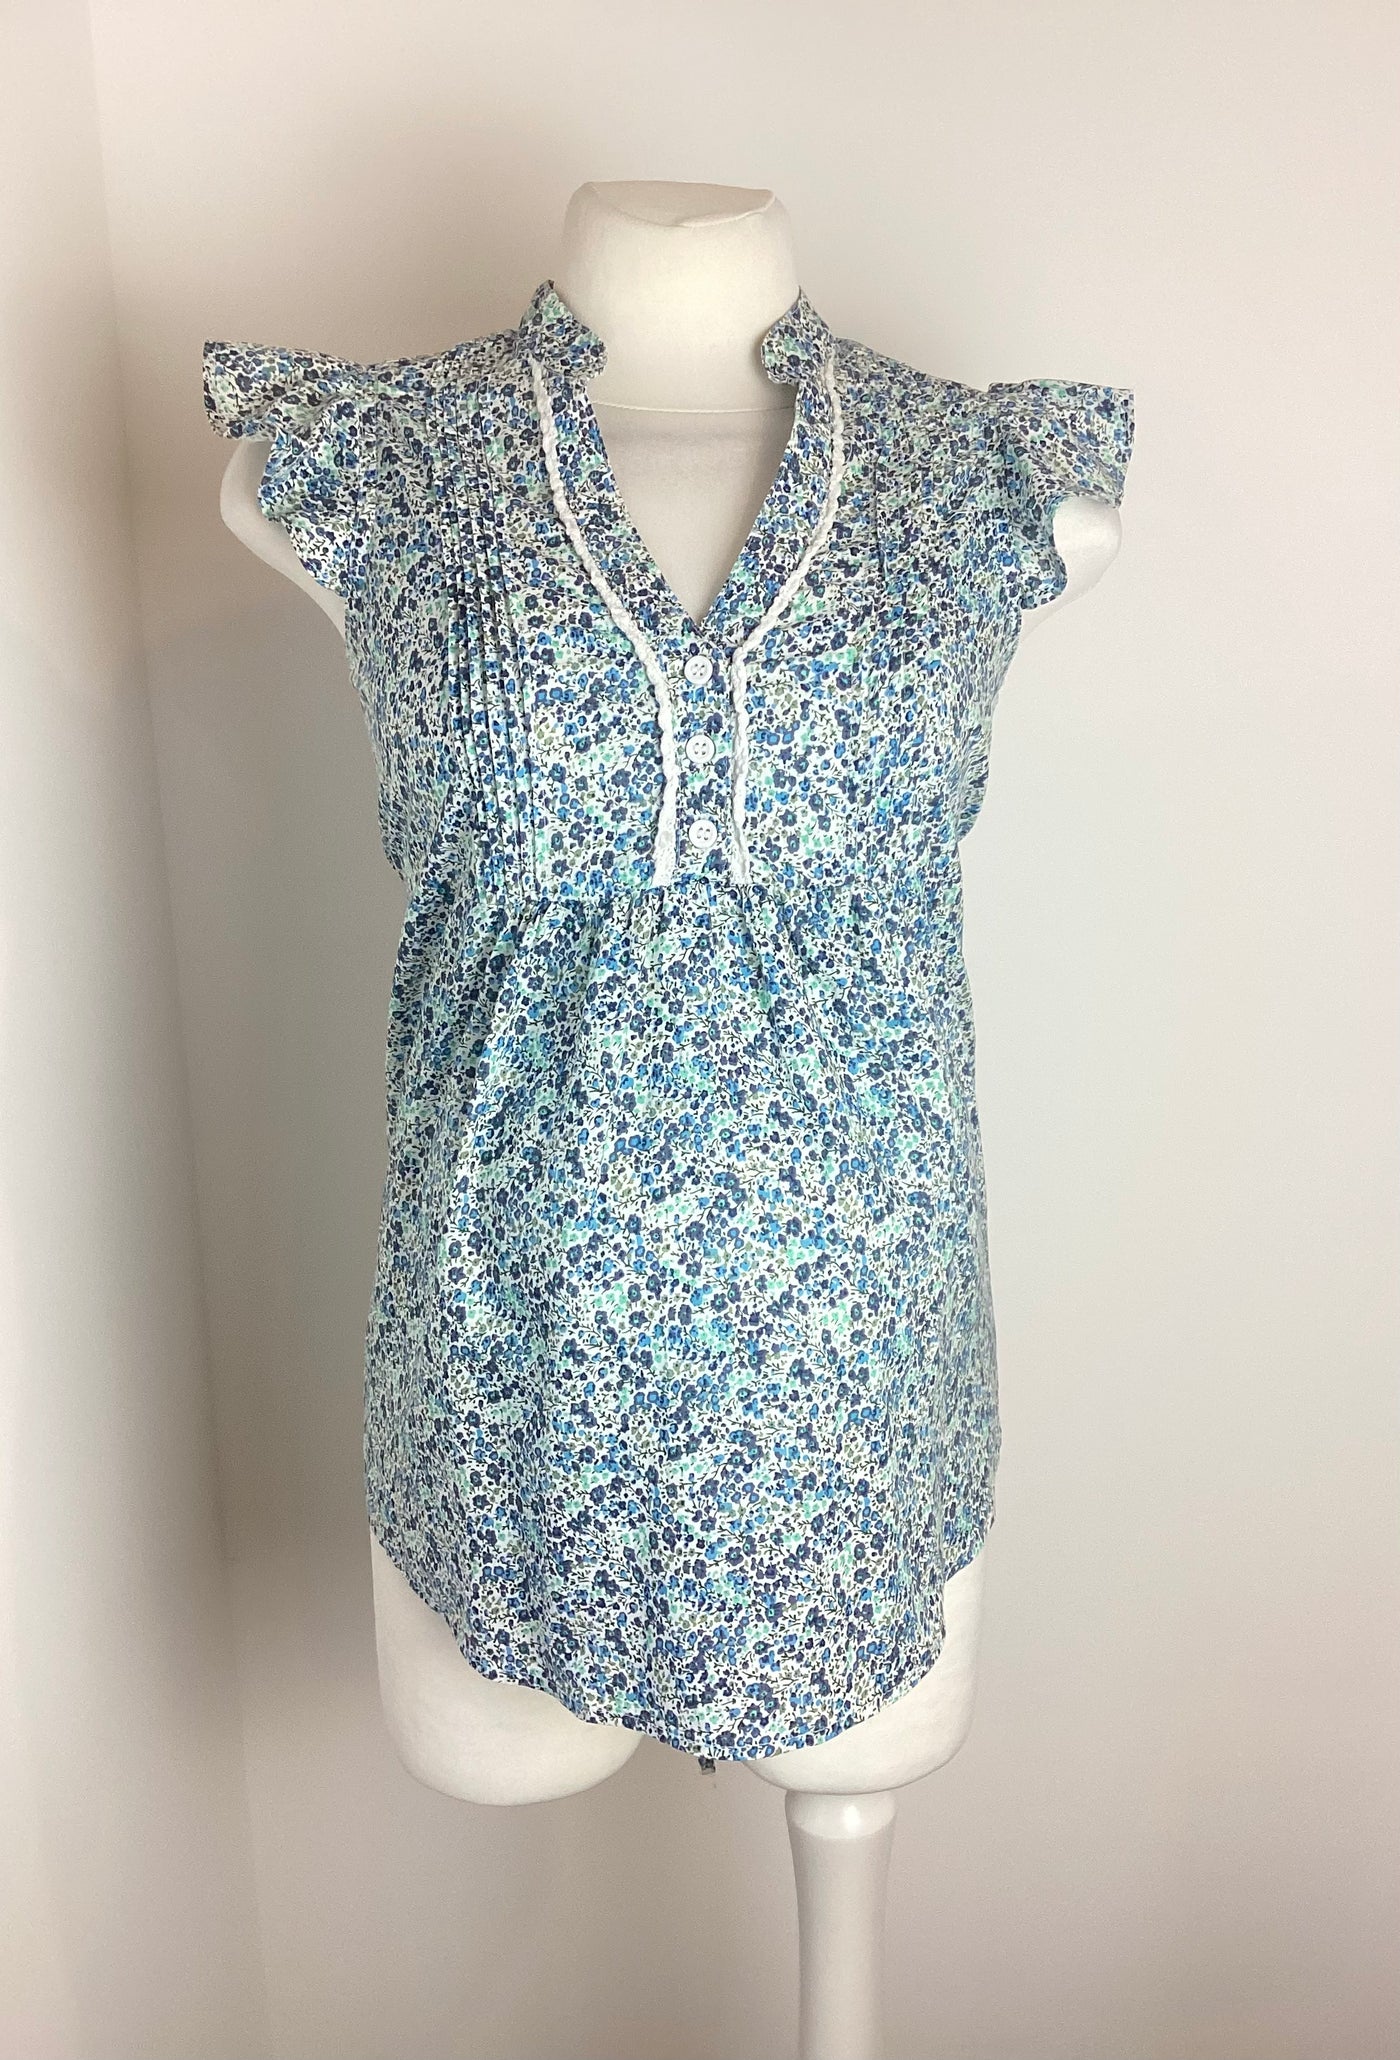 New Look Maternity blue, green & white floral cap sleeve top with waist tie - Size 8